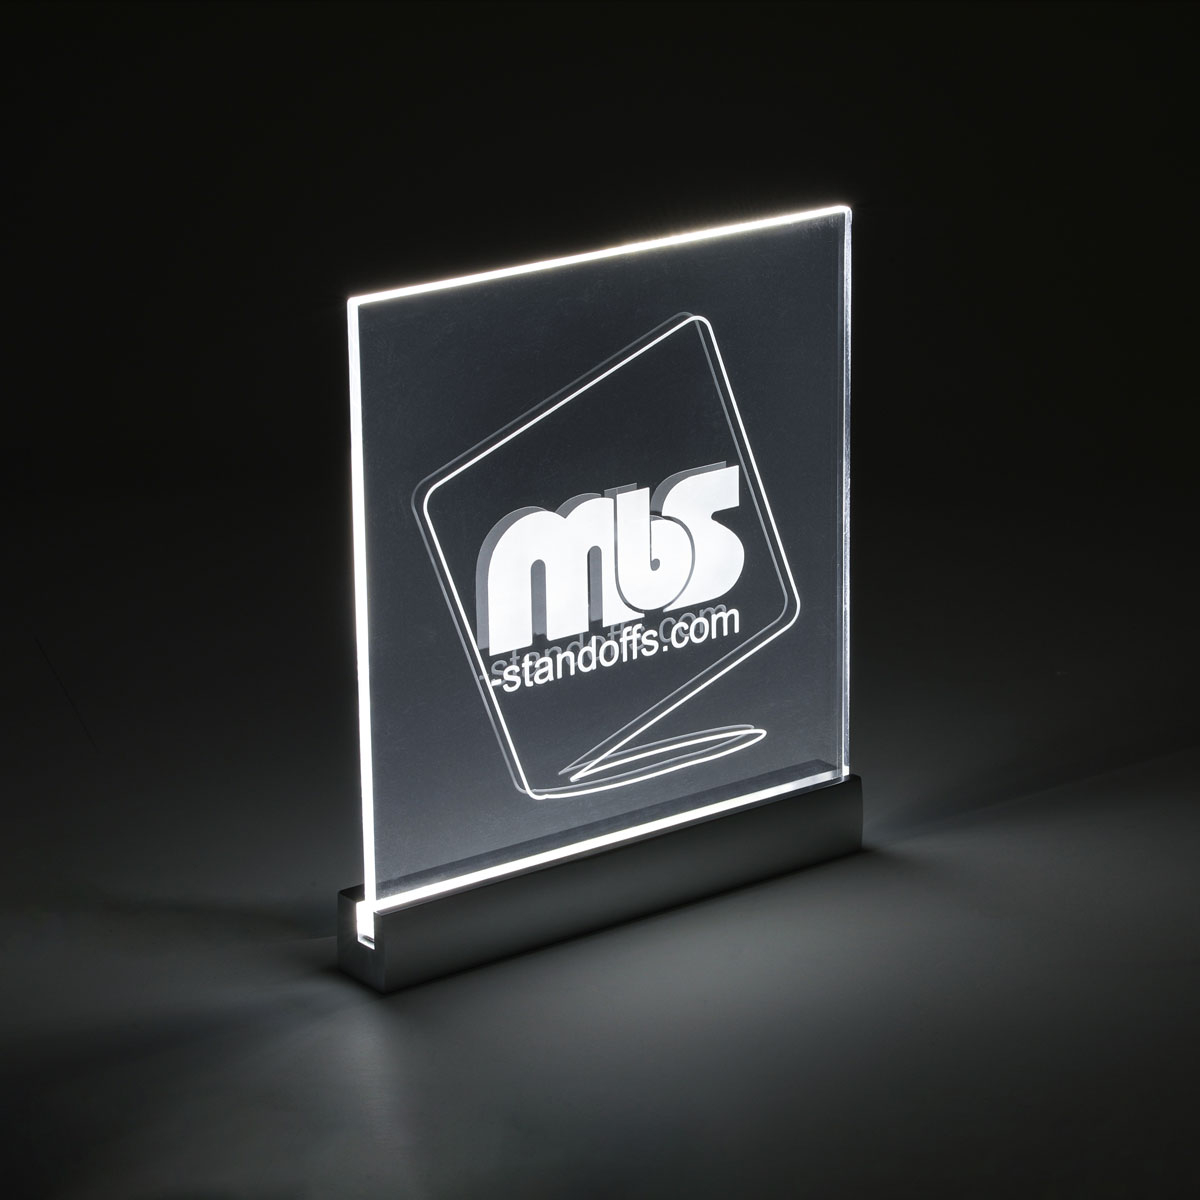 WHITE LED Sign Clamp in 3 1/8'' (80 mm) length X 1'' (25.4 mm) Silver satin aluminum finish.Mount Kit Supports Signs Up To 5/16'' Thick, Wall Mount, Low Voltage transformer included.